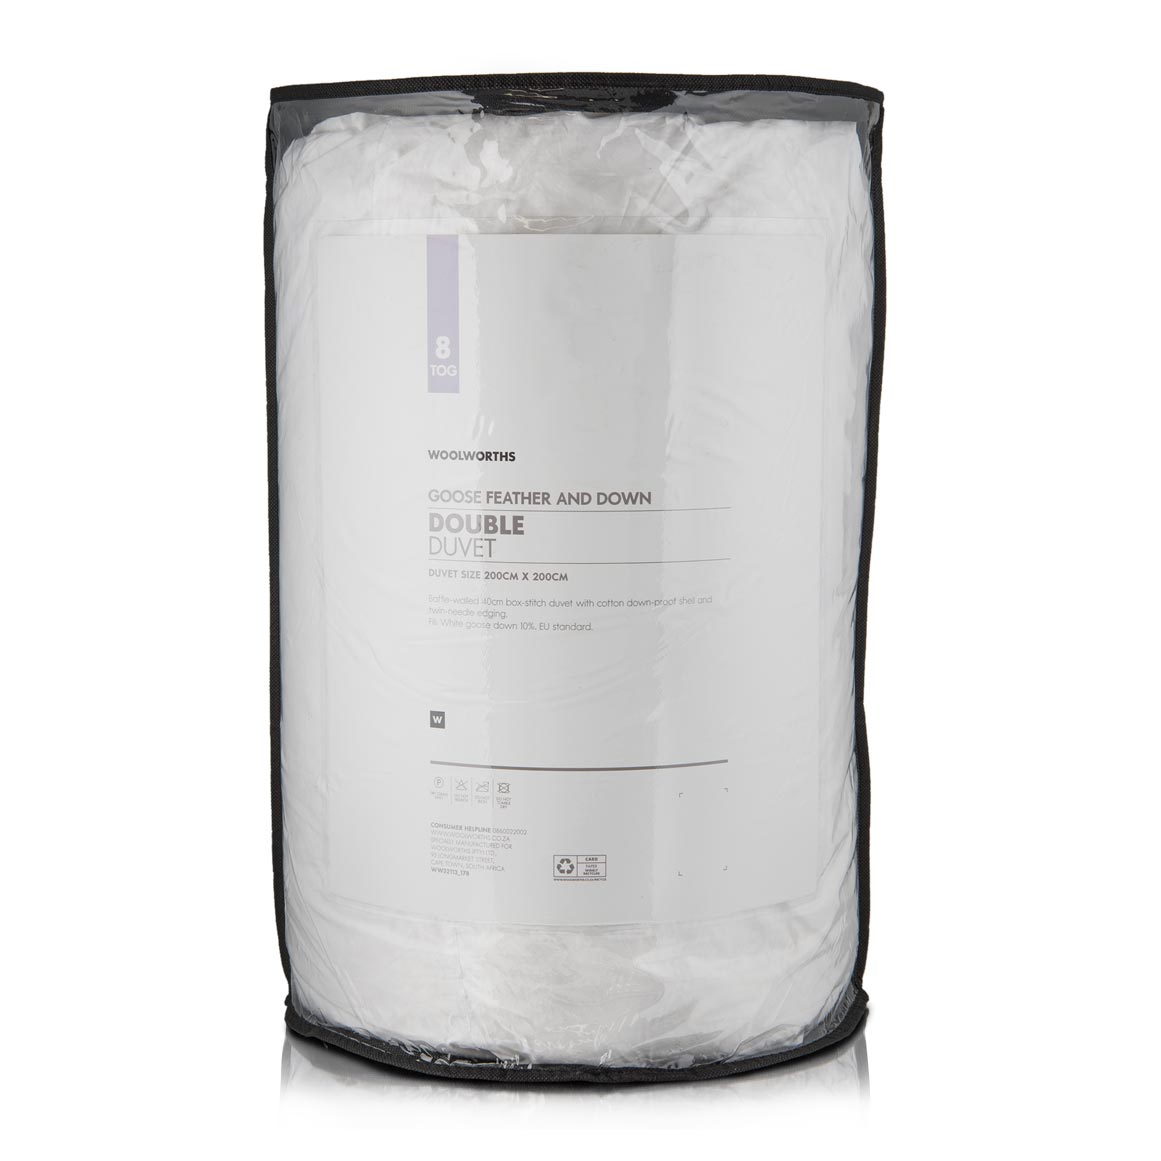 Goose Feather And Down 8 Tog Duvet Woolworths Co Za